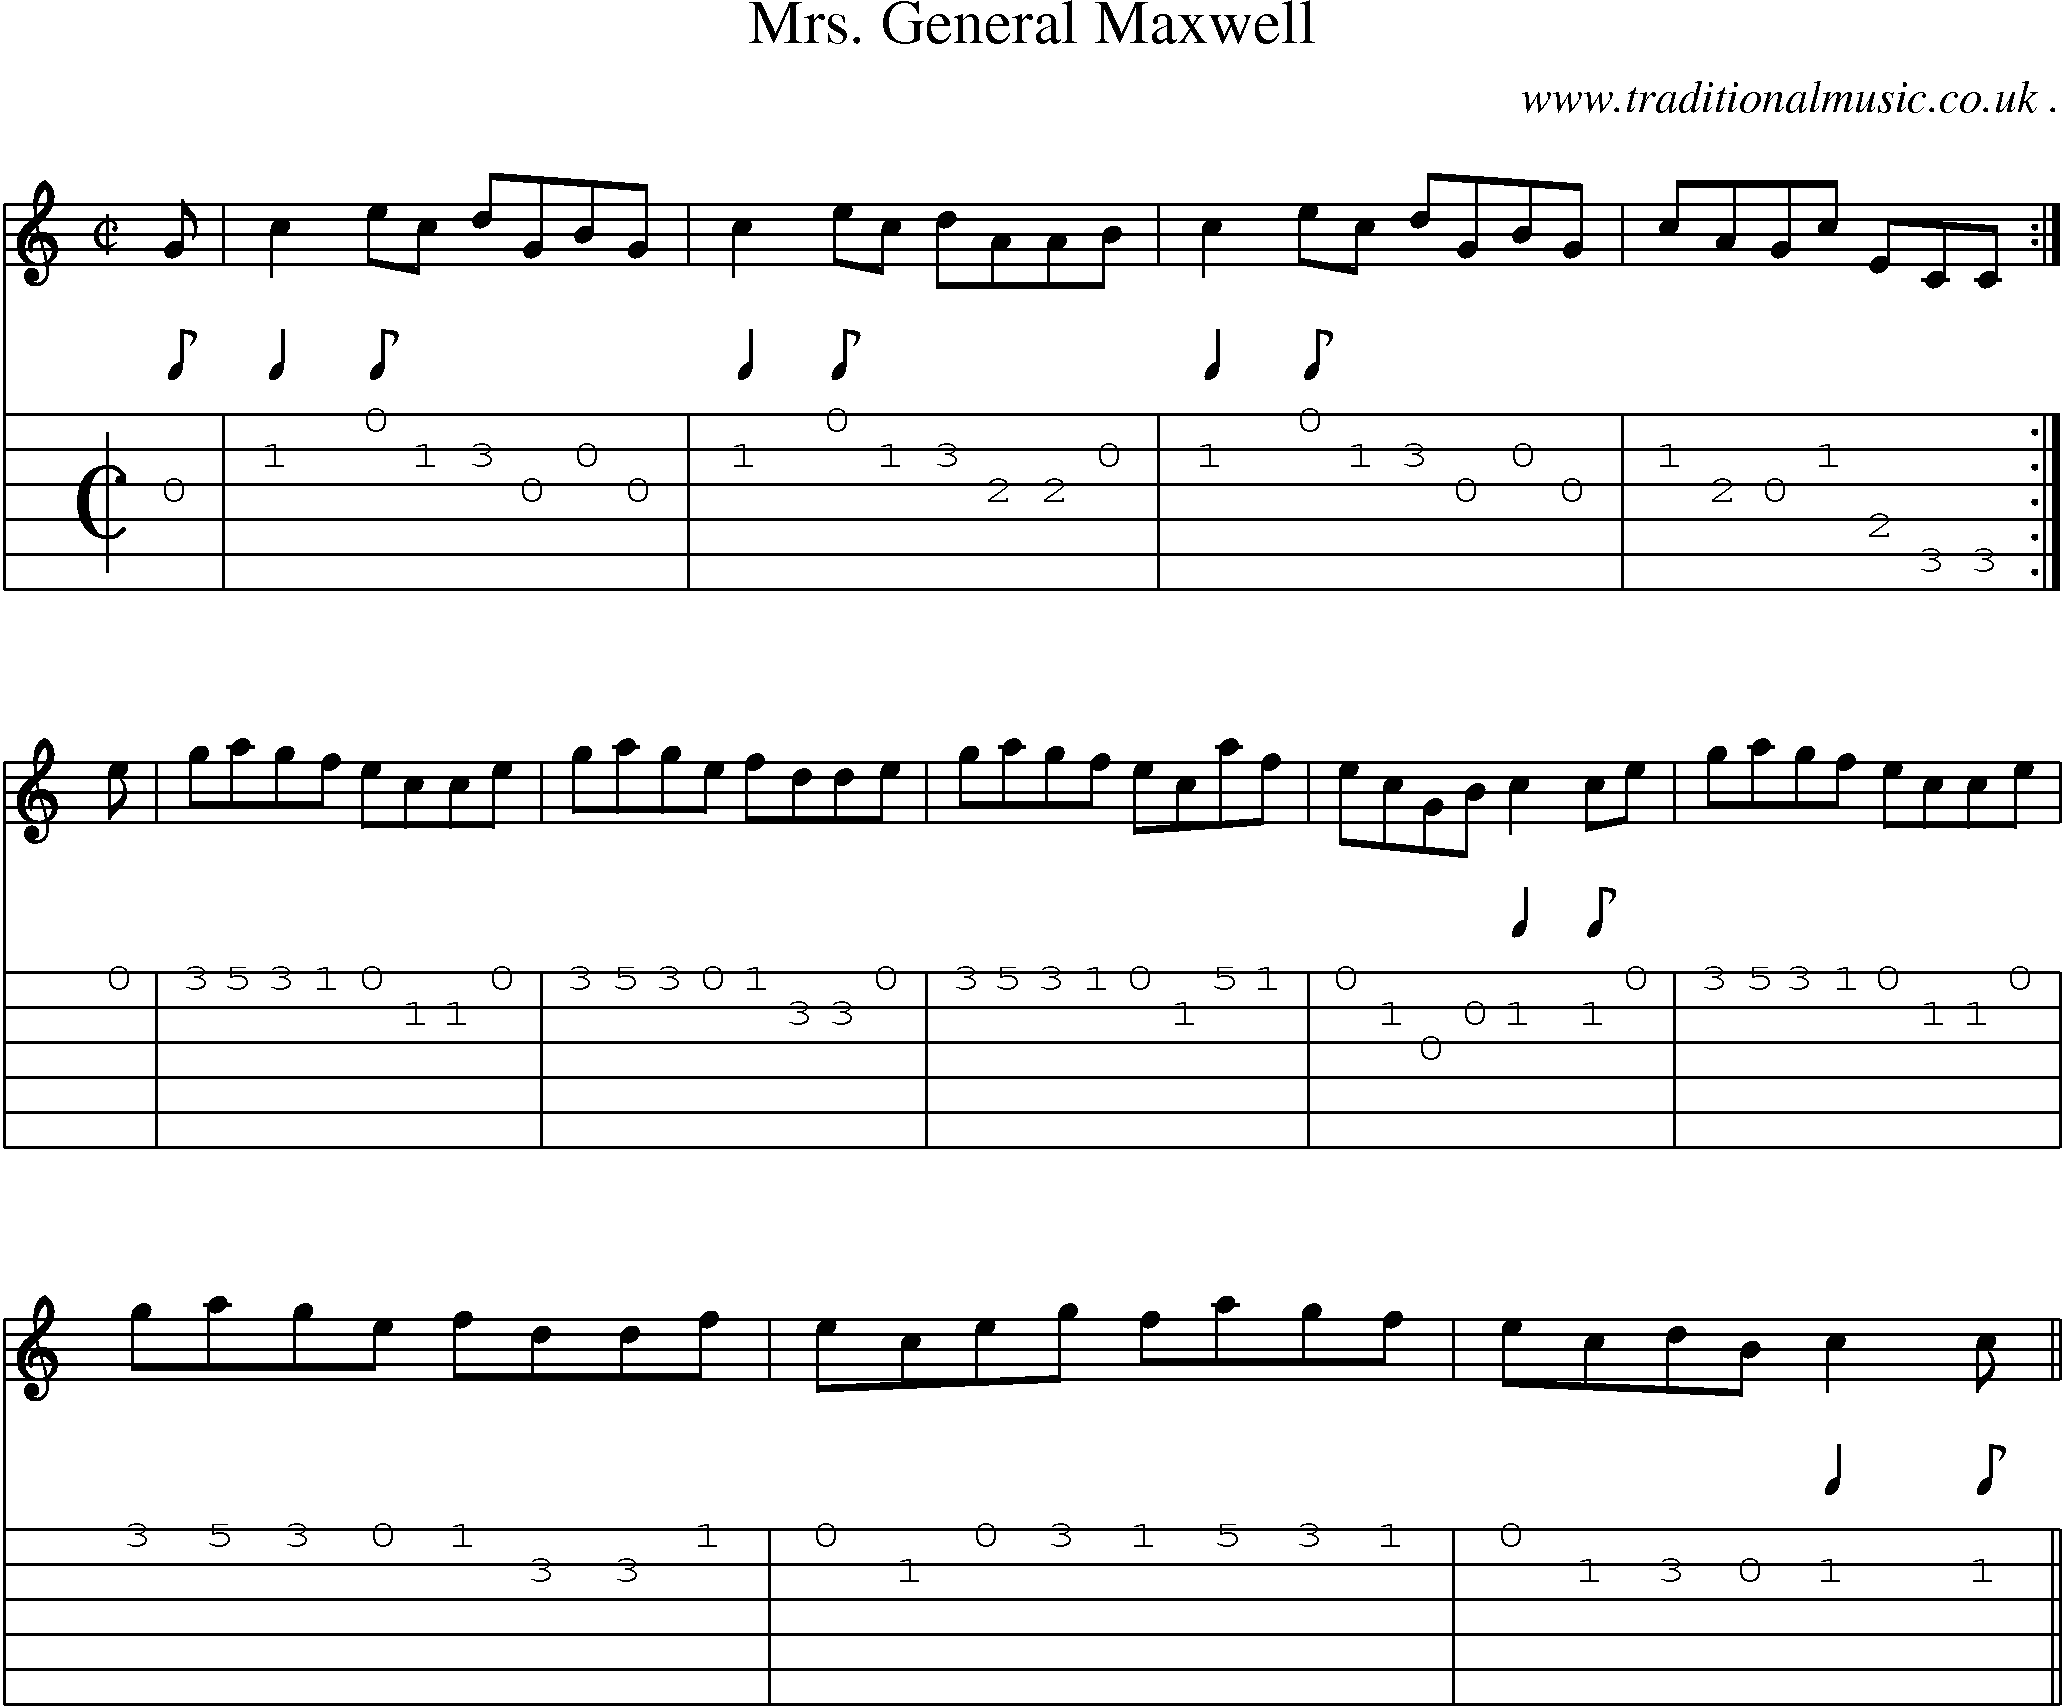 Sheet-music  score, Chords and Guitar Tabs for Mrs General Maxwell